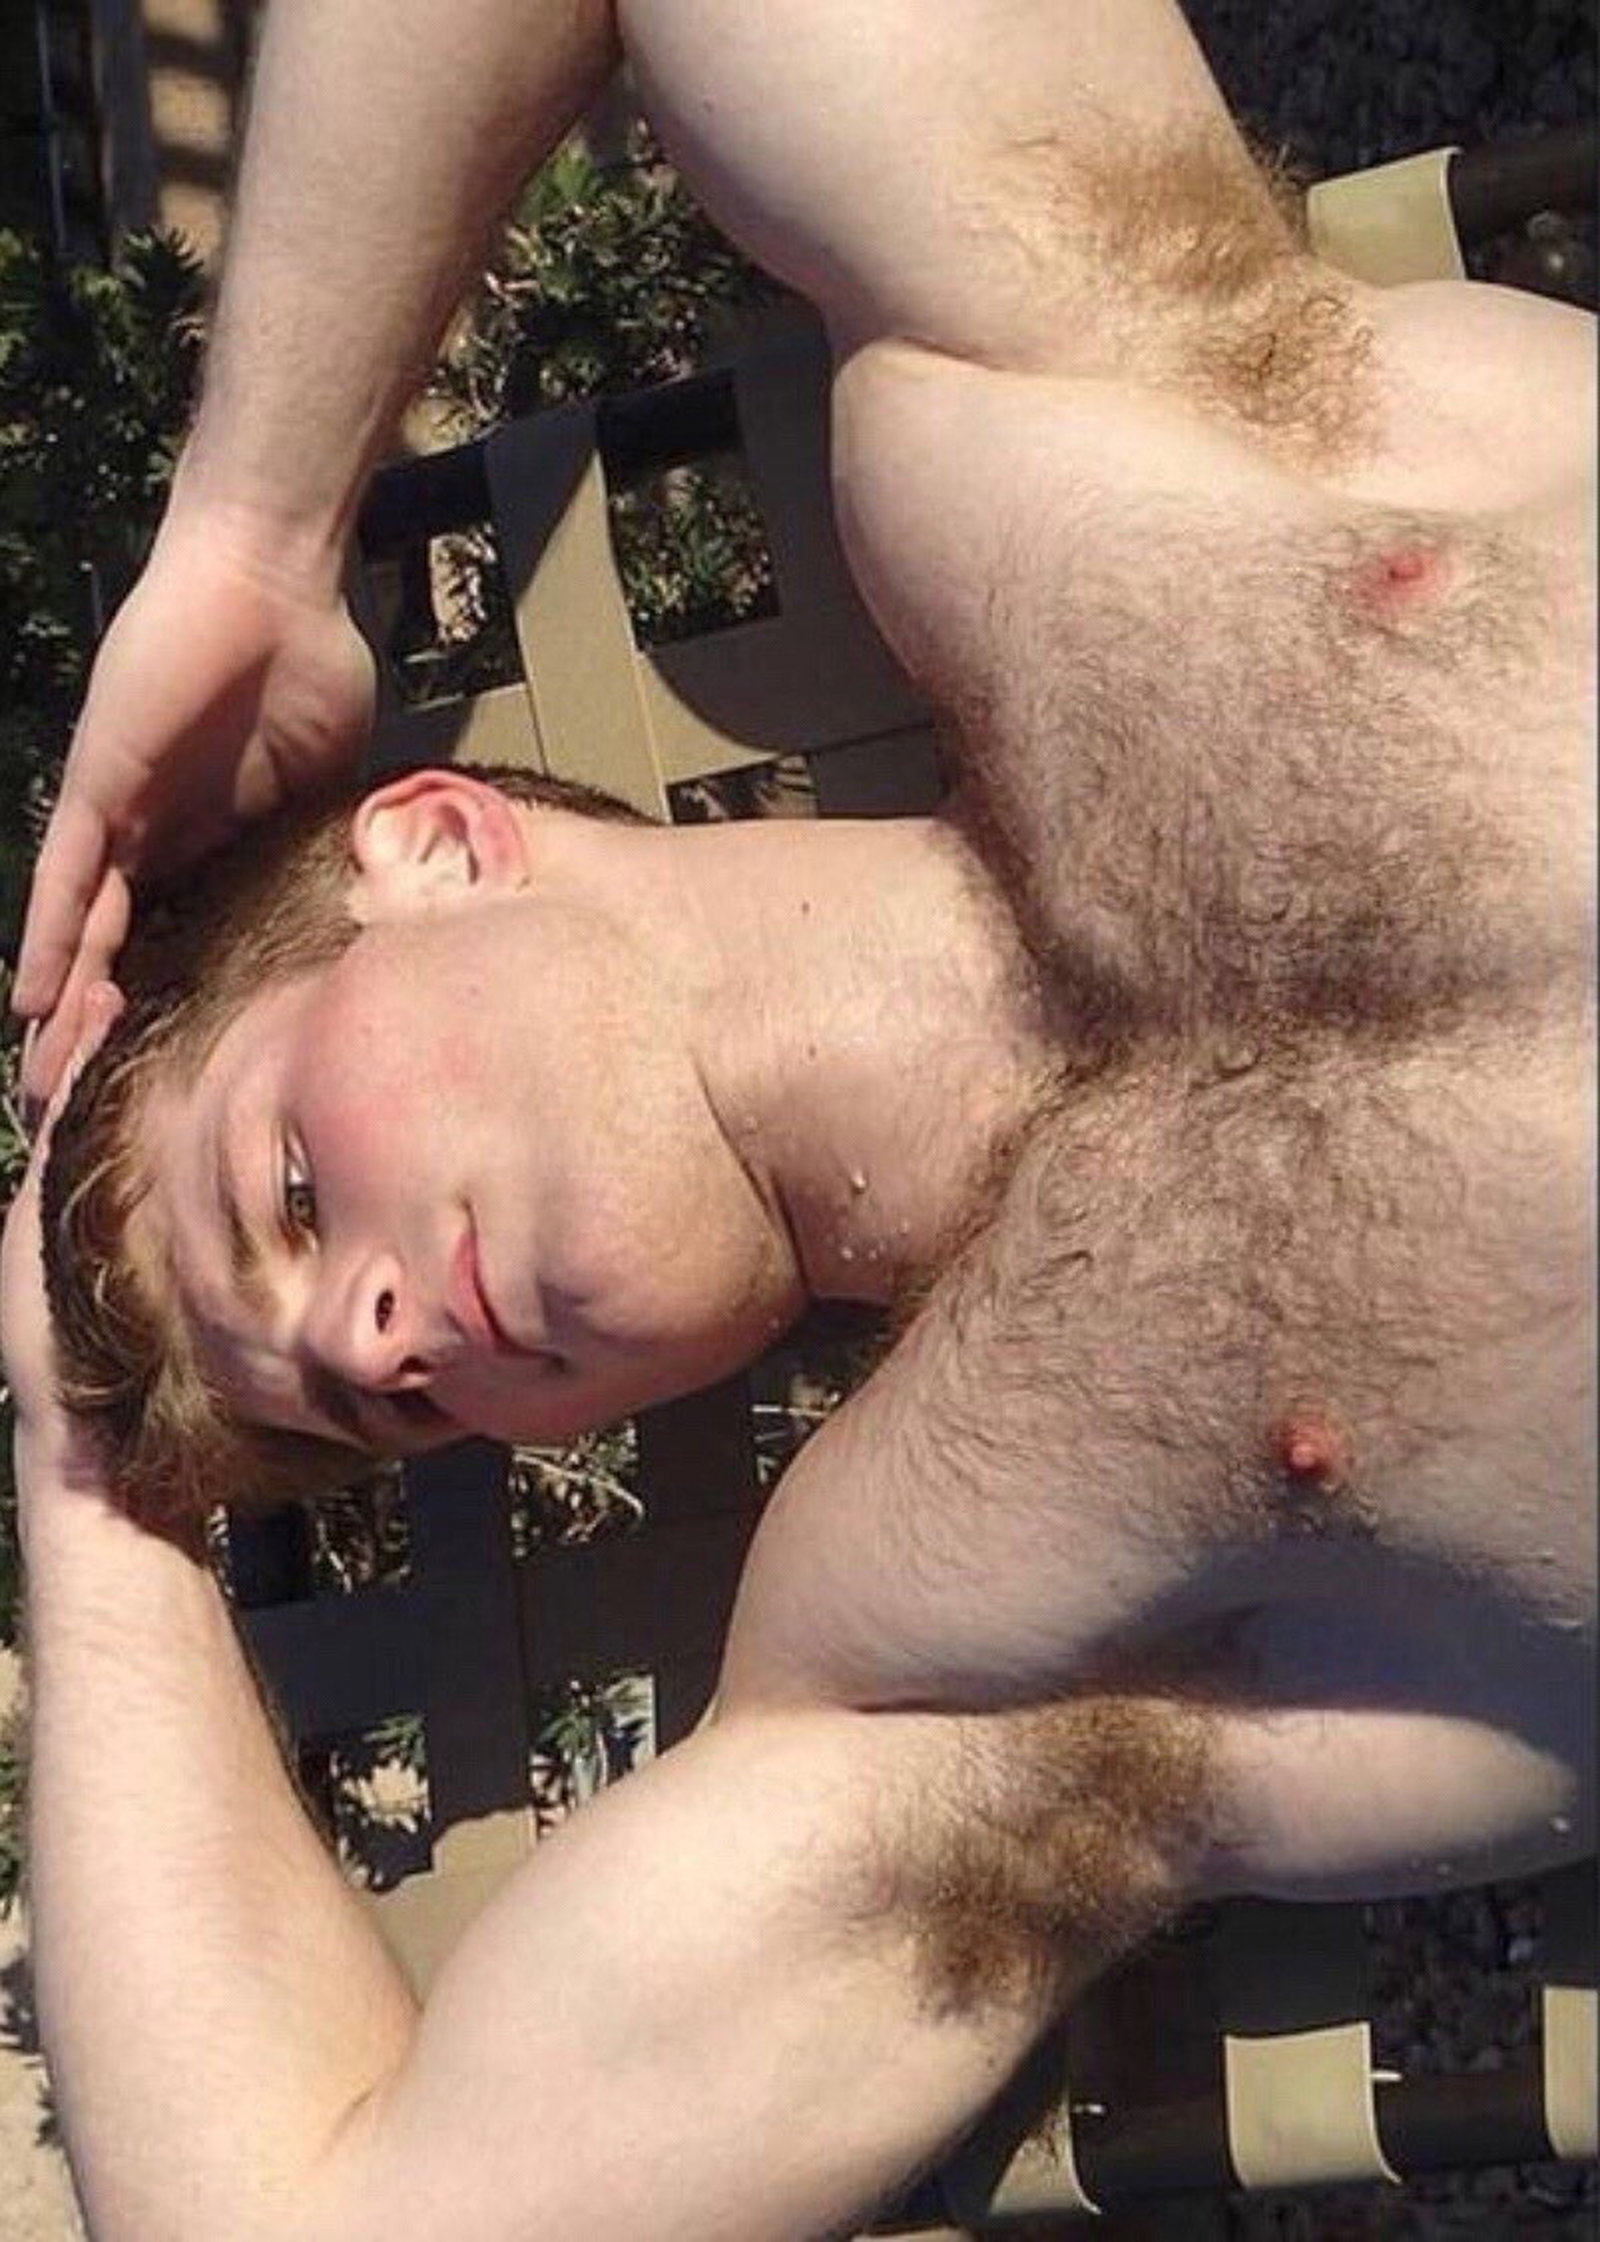 Watch the Photo by hotfux with the username @hotfux, posted on October 29, 2019. The post is about the topic Gay Hairy Men.